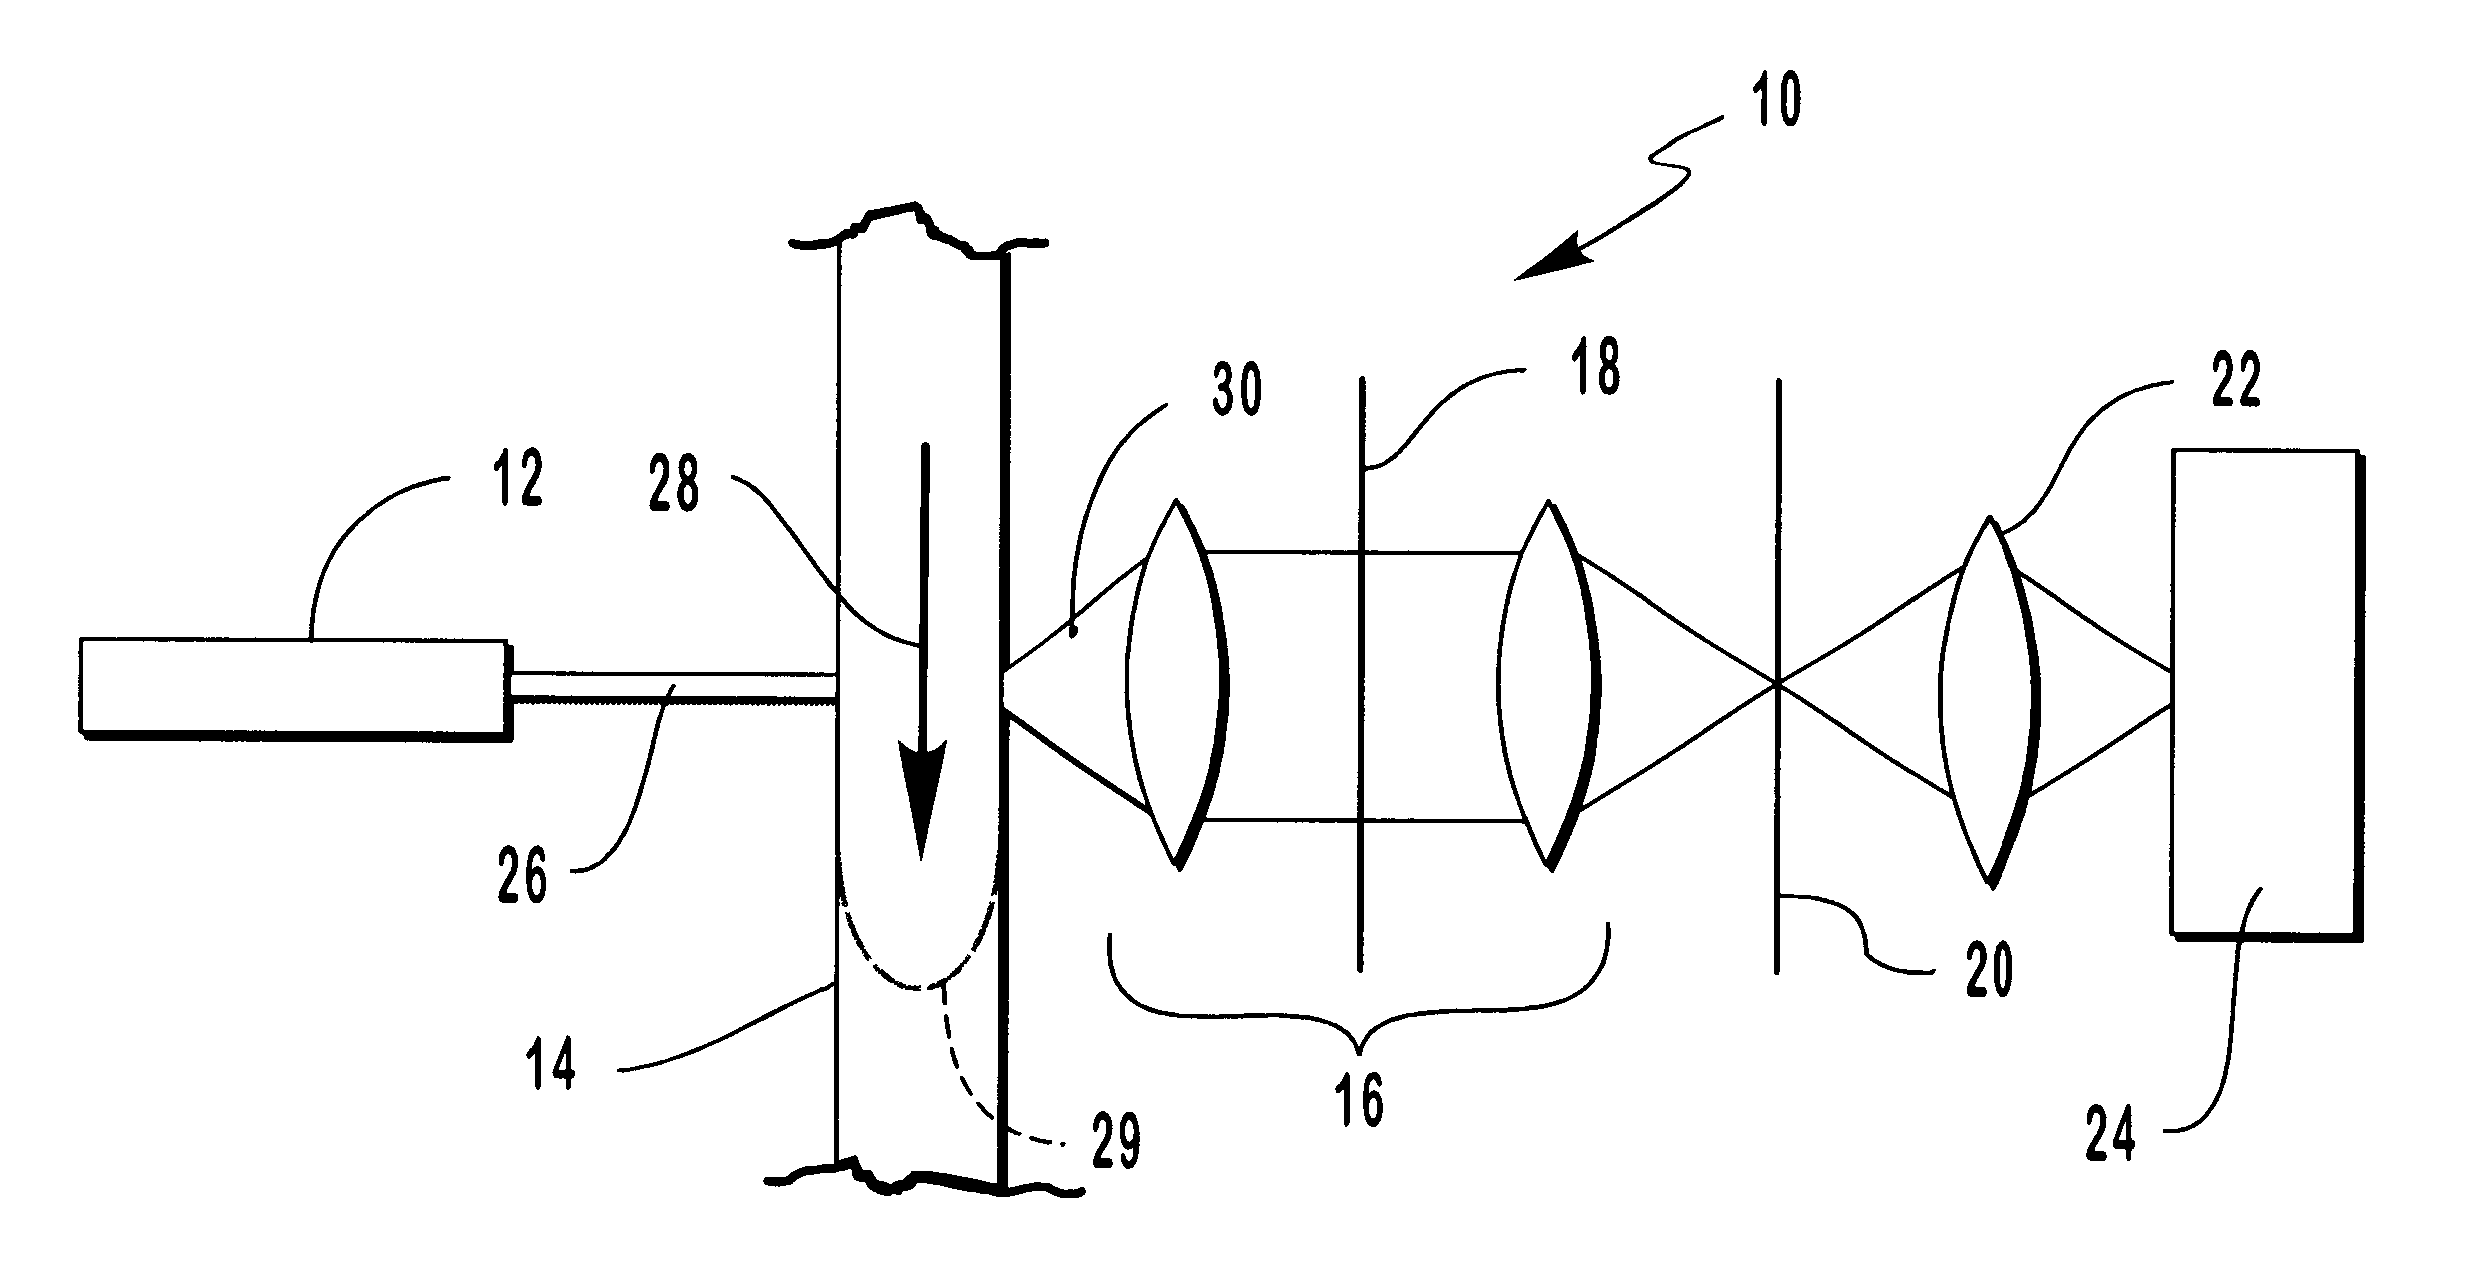 Flow cytometry apparatus and method